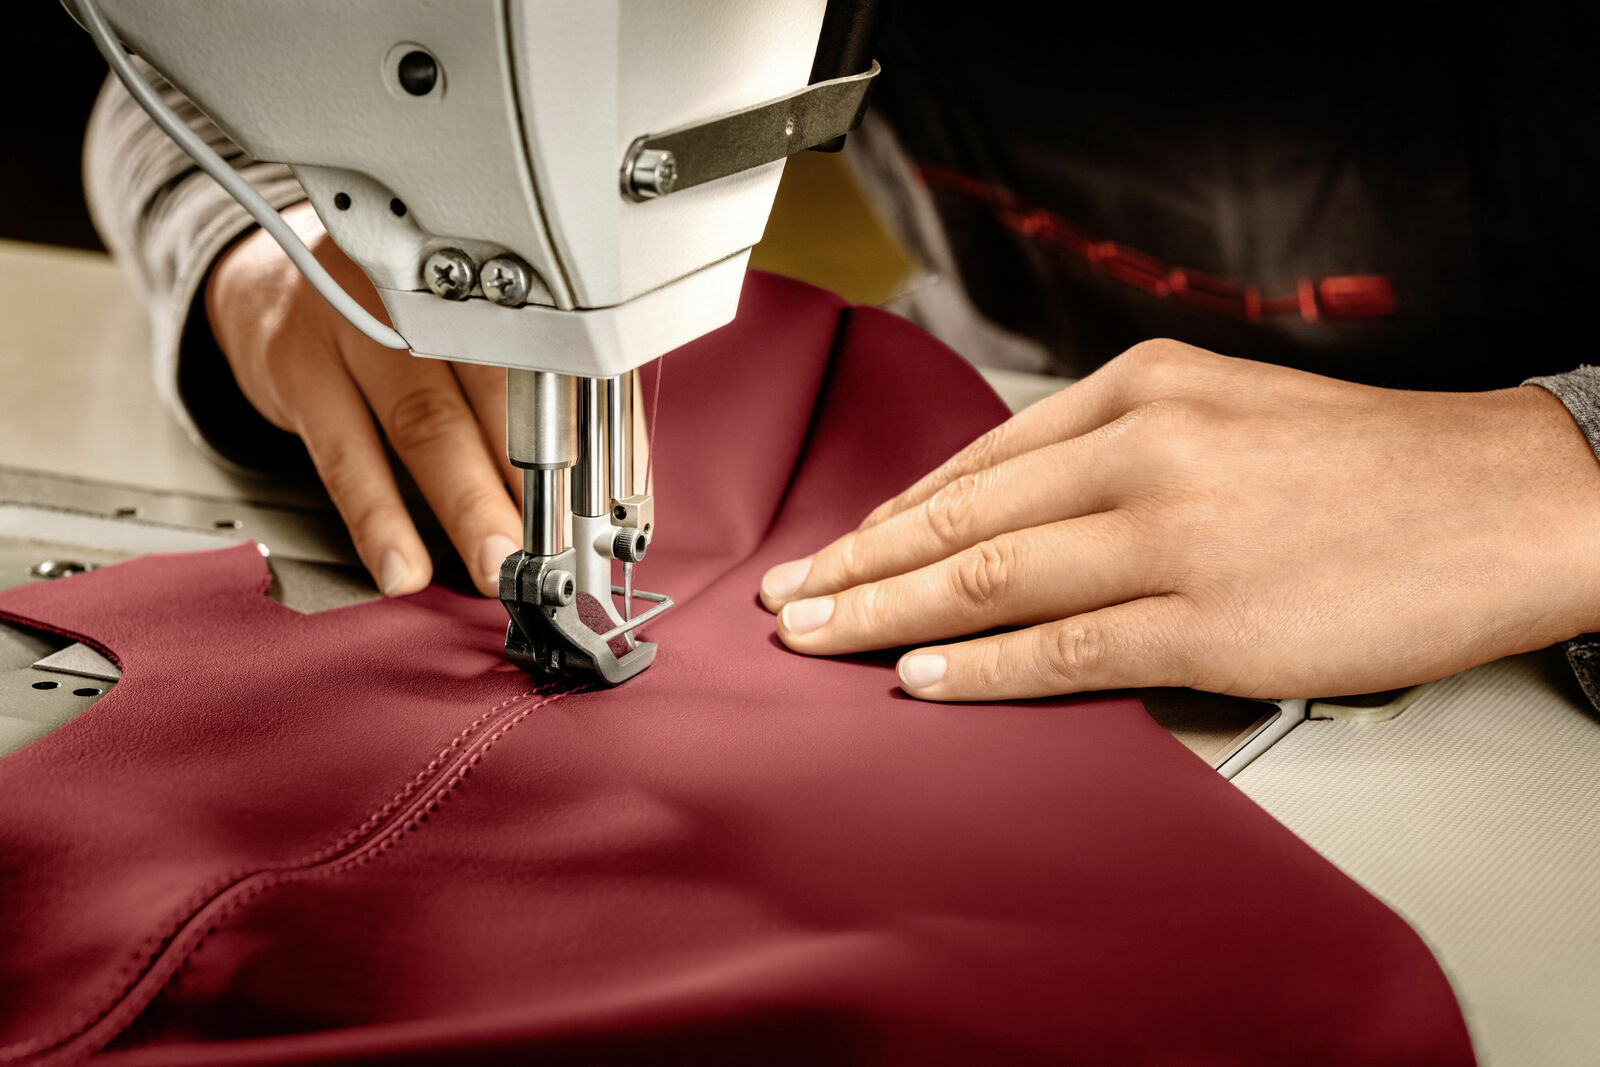 Volkswagen is committed to more sustainable leather sourcing